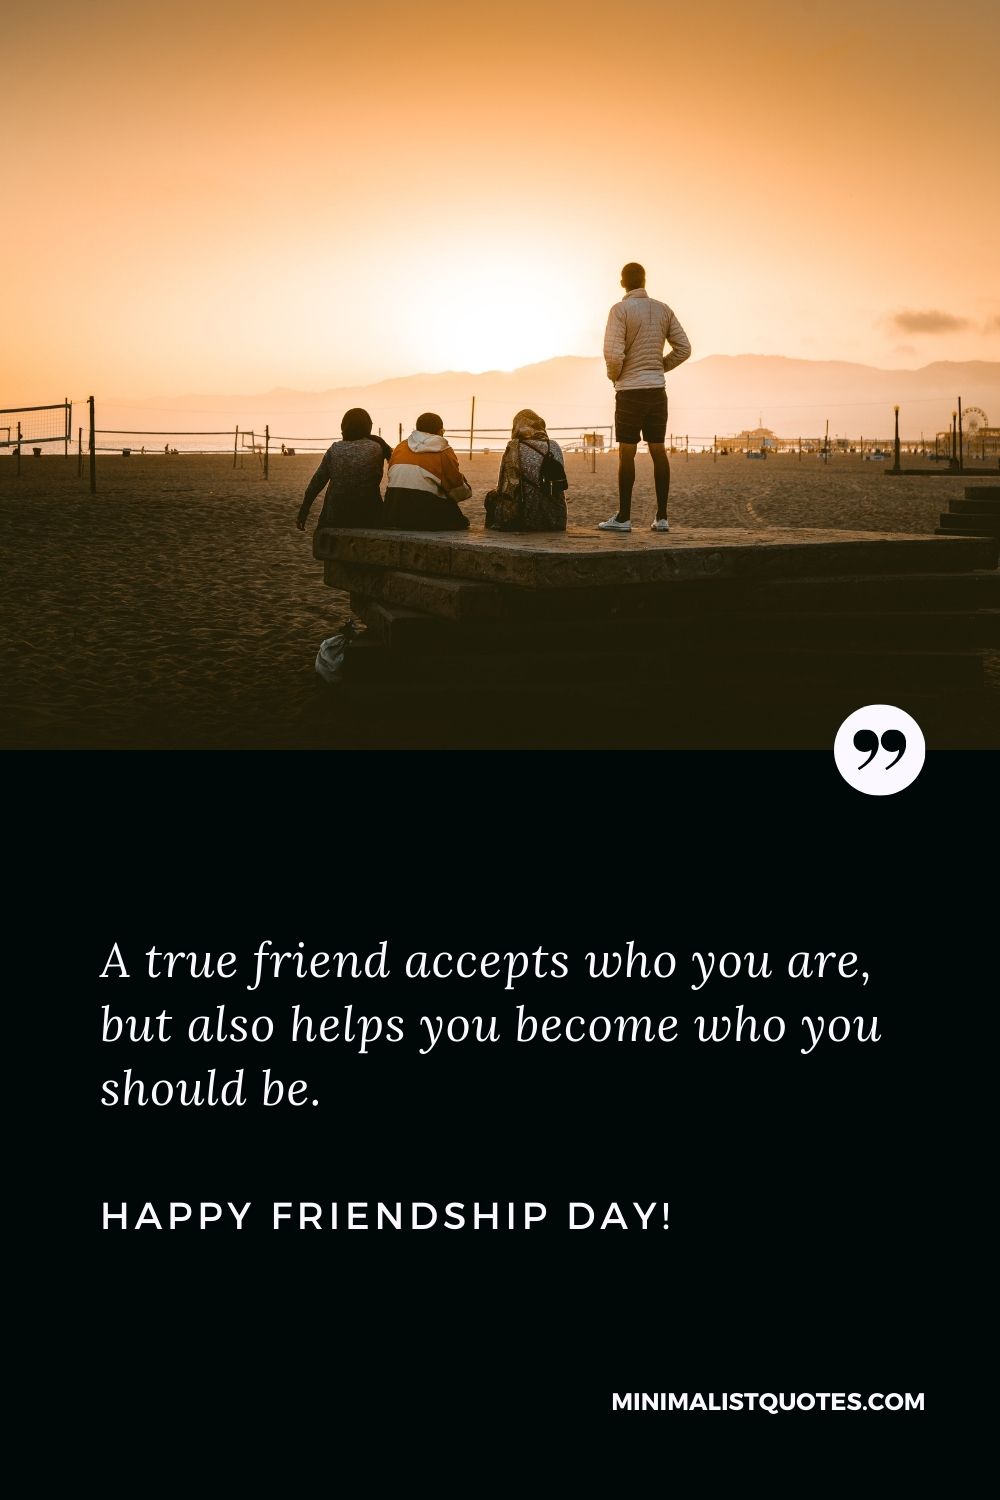 Happy Friendship Day Quotes: A true friend accepts who you are, but also helps you become who you should be. Happy Friendship Day!